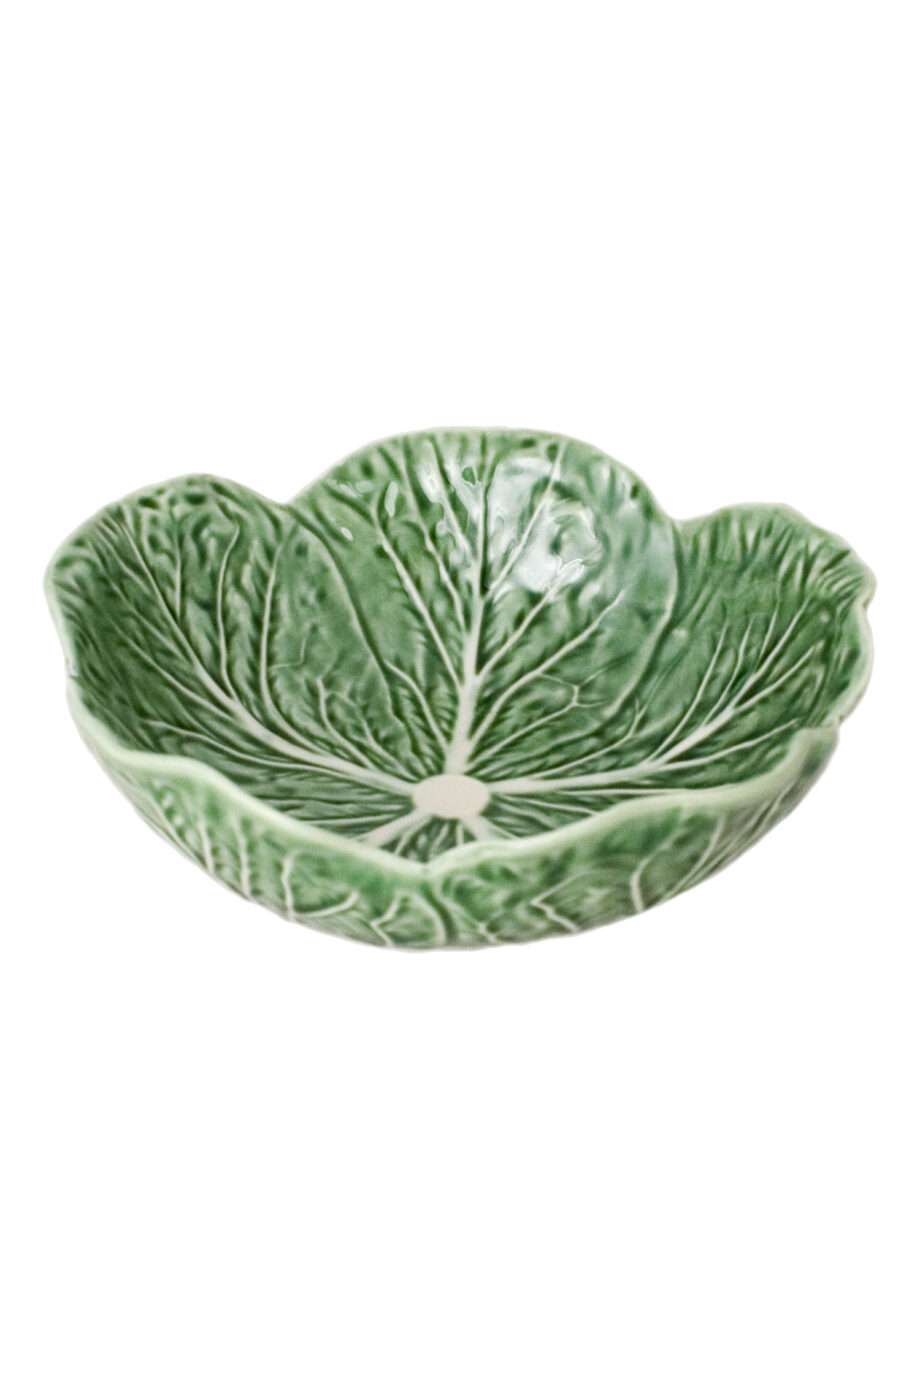 tapas bowl curly kale green exotic pottery small